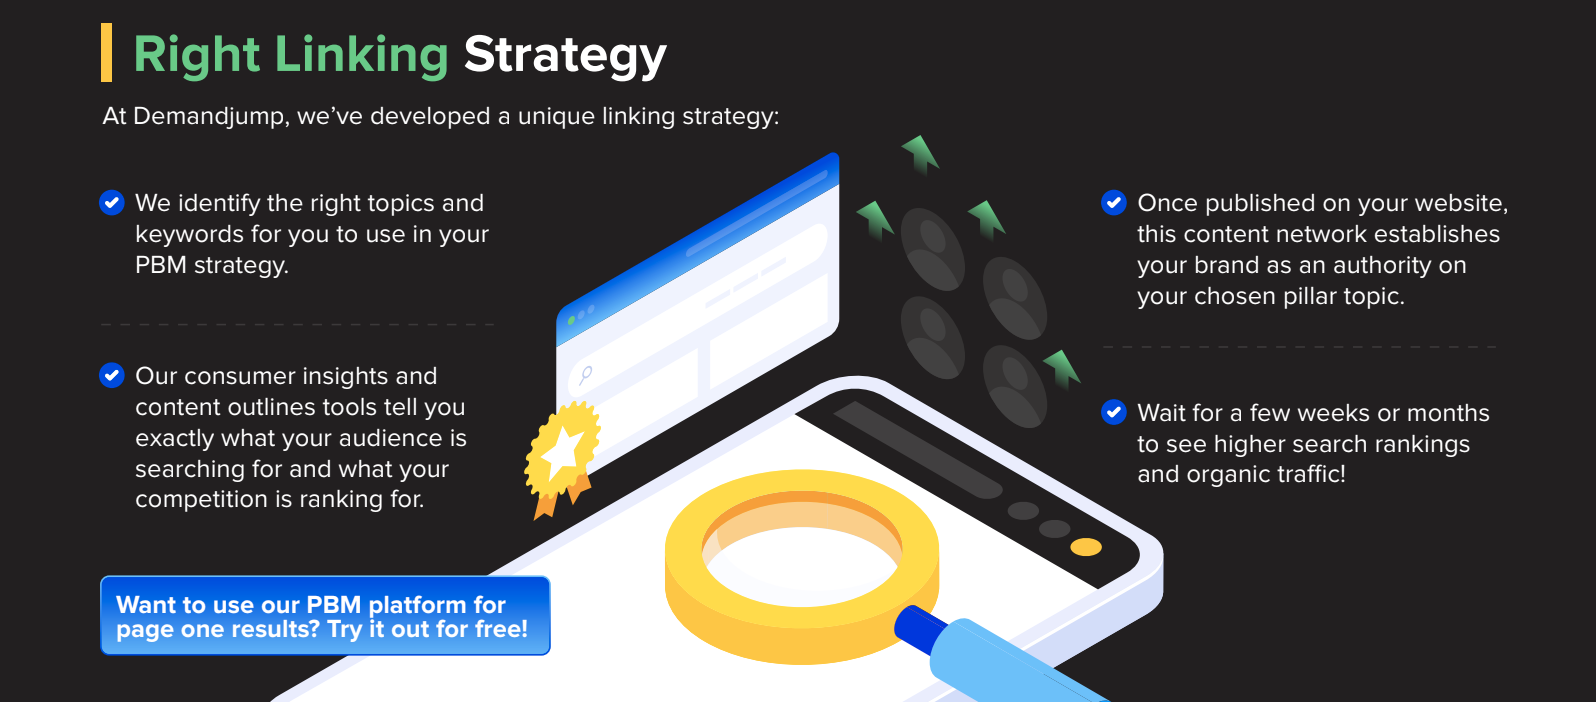 Right Linking Strategy